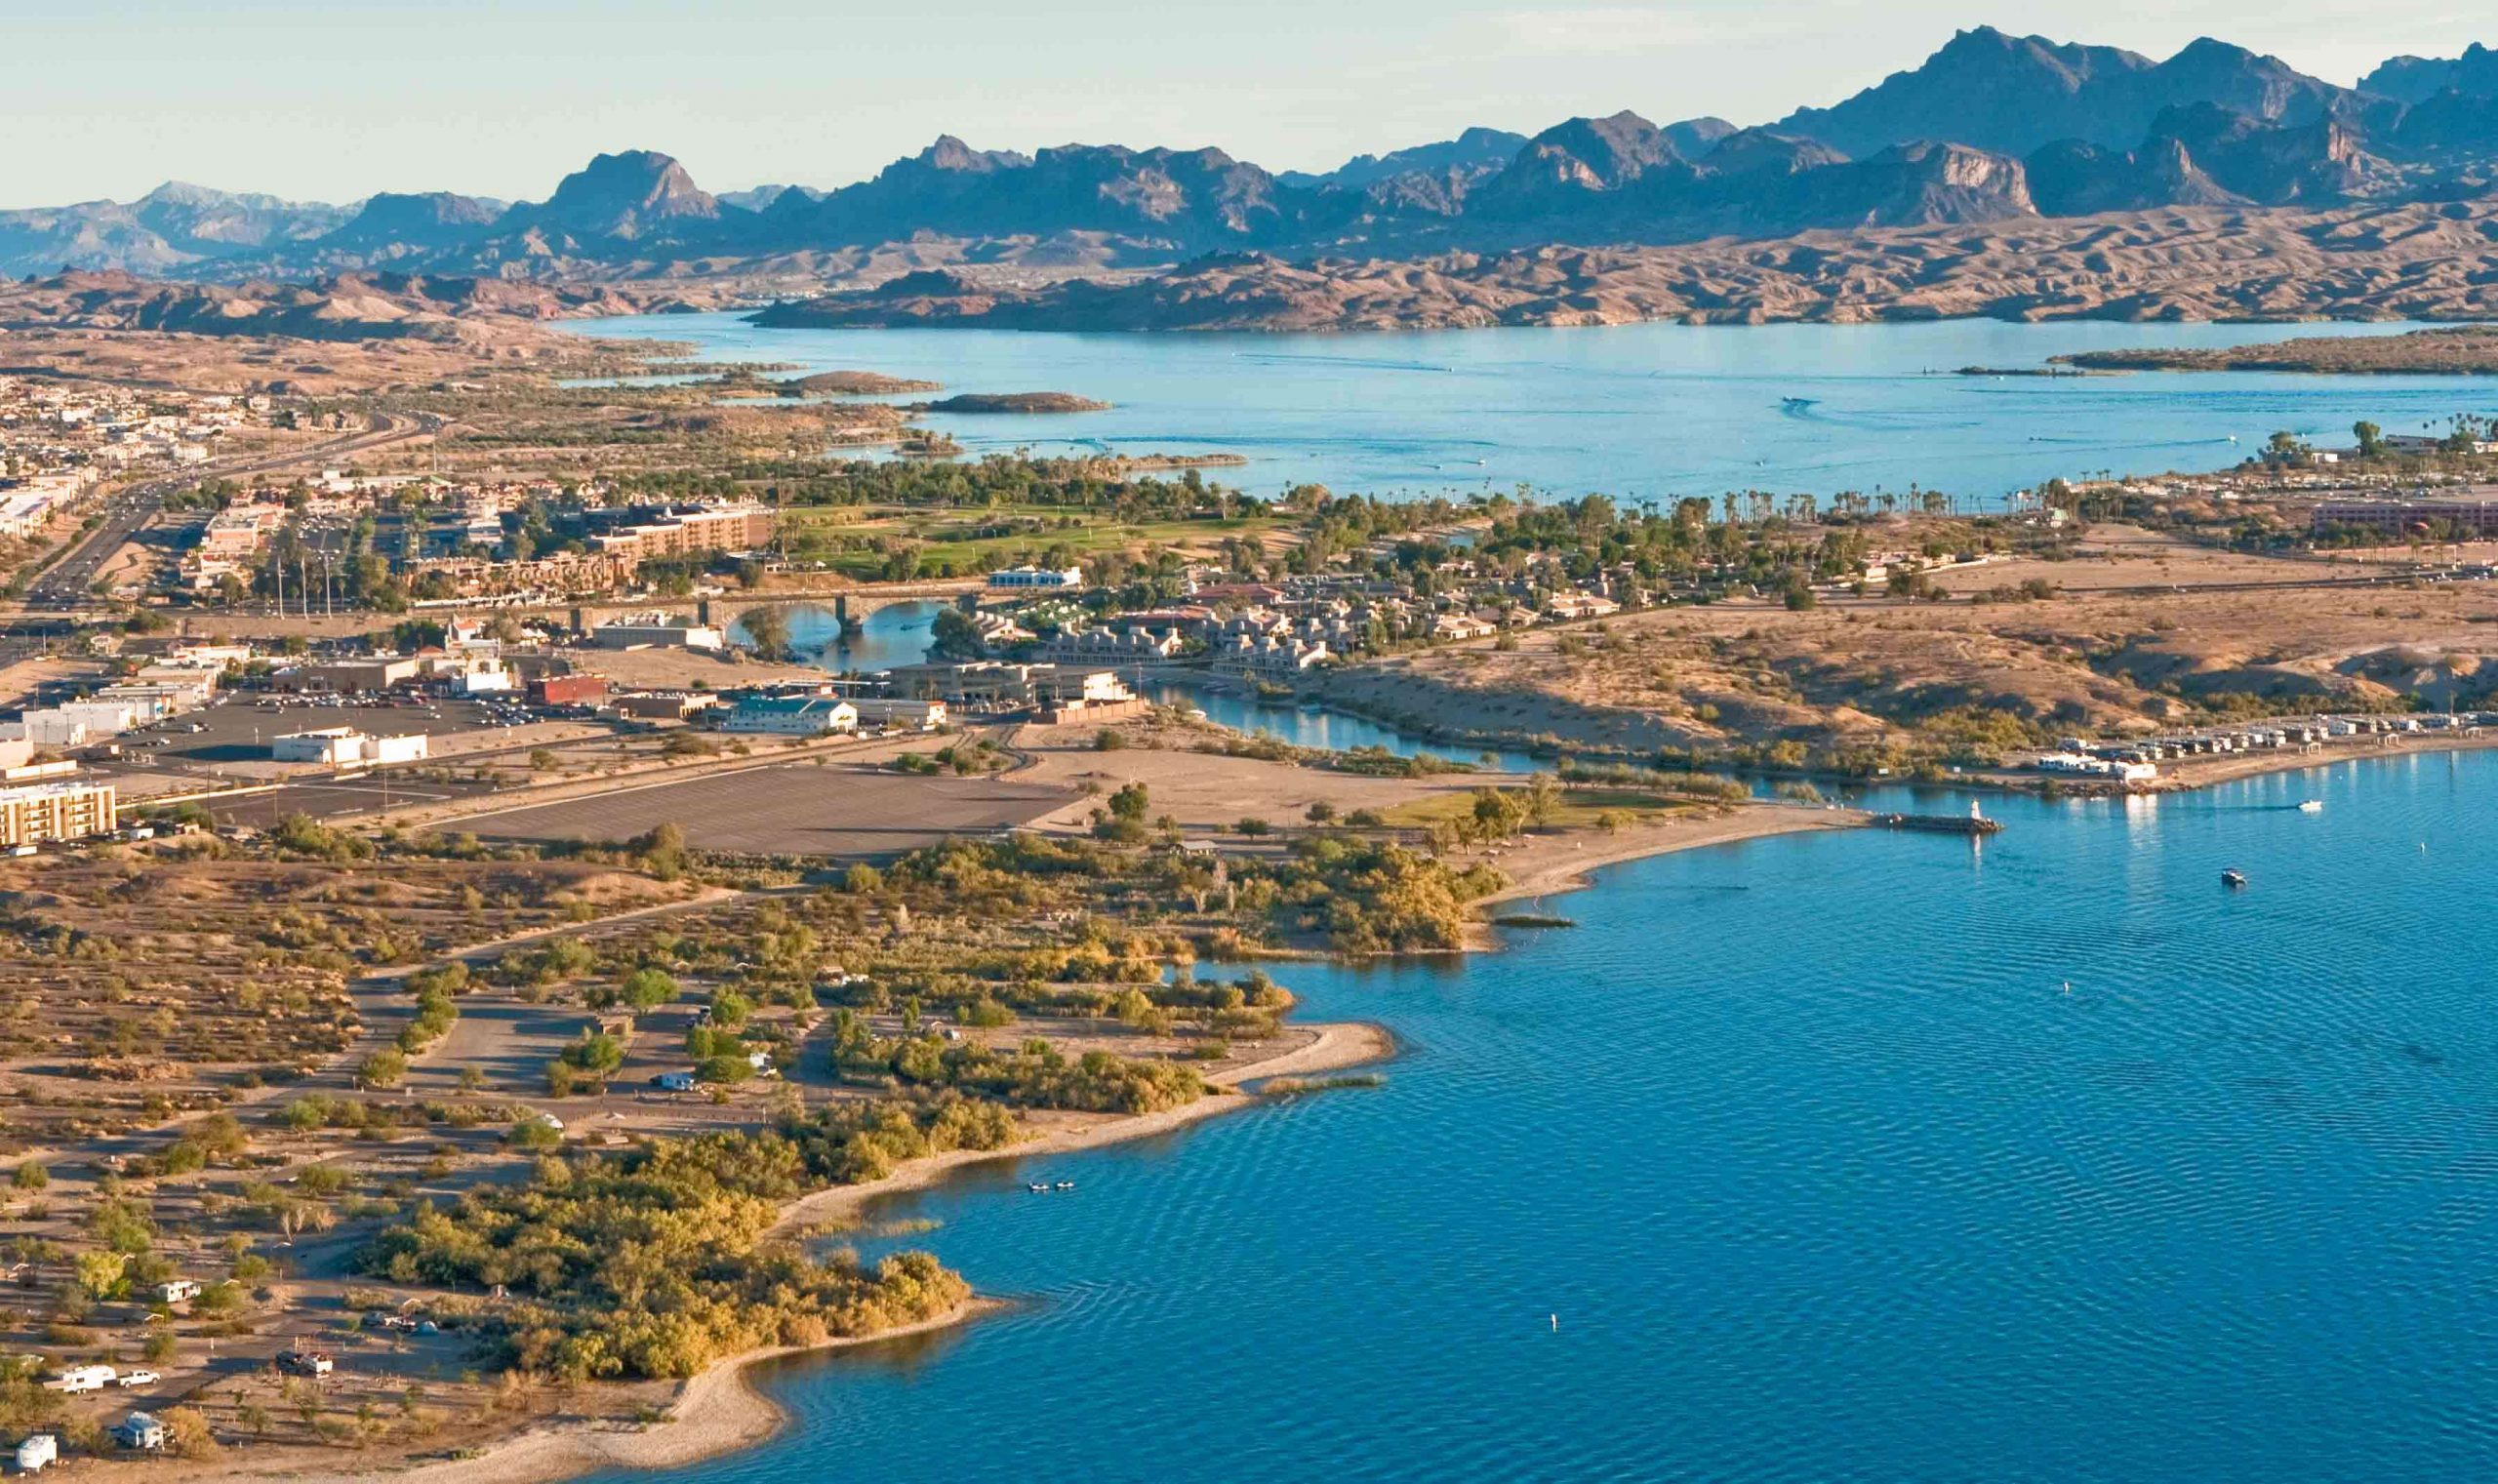 Lake Havasu is a large reservoir on the Colorado River, and it is located on the California and Arizona border. The lake sits behind Parker Dam, and the lake's primary purpose is storing water for pumping the dam's two aqueducts.